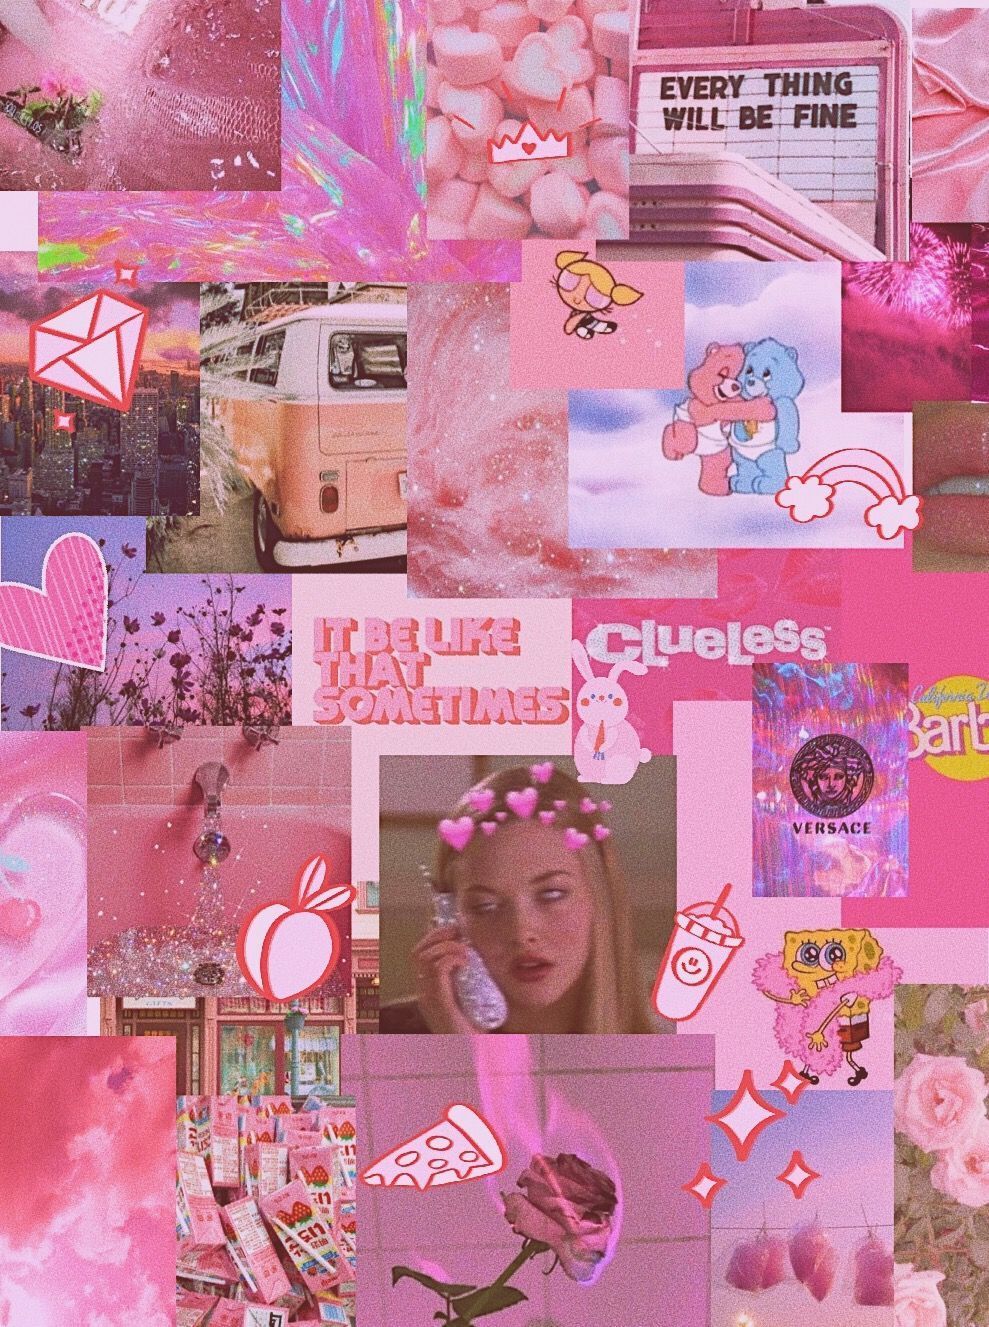 Aesthetic collage of pink images, including a van, a girl, and text. - Pink, pink phone, phone